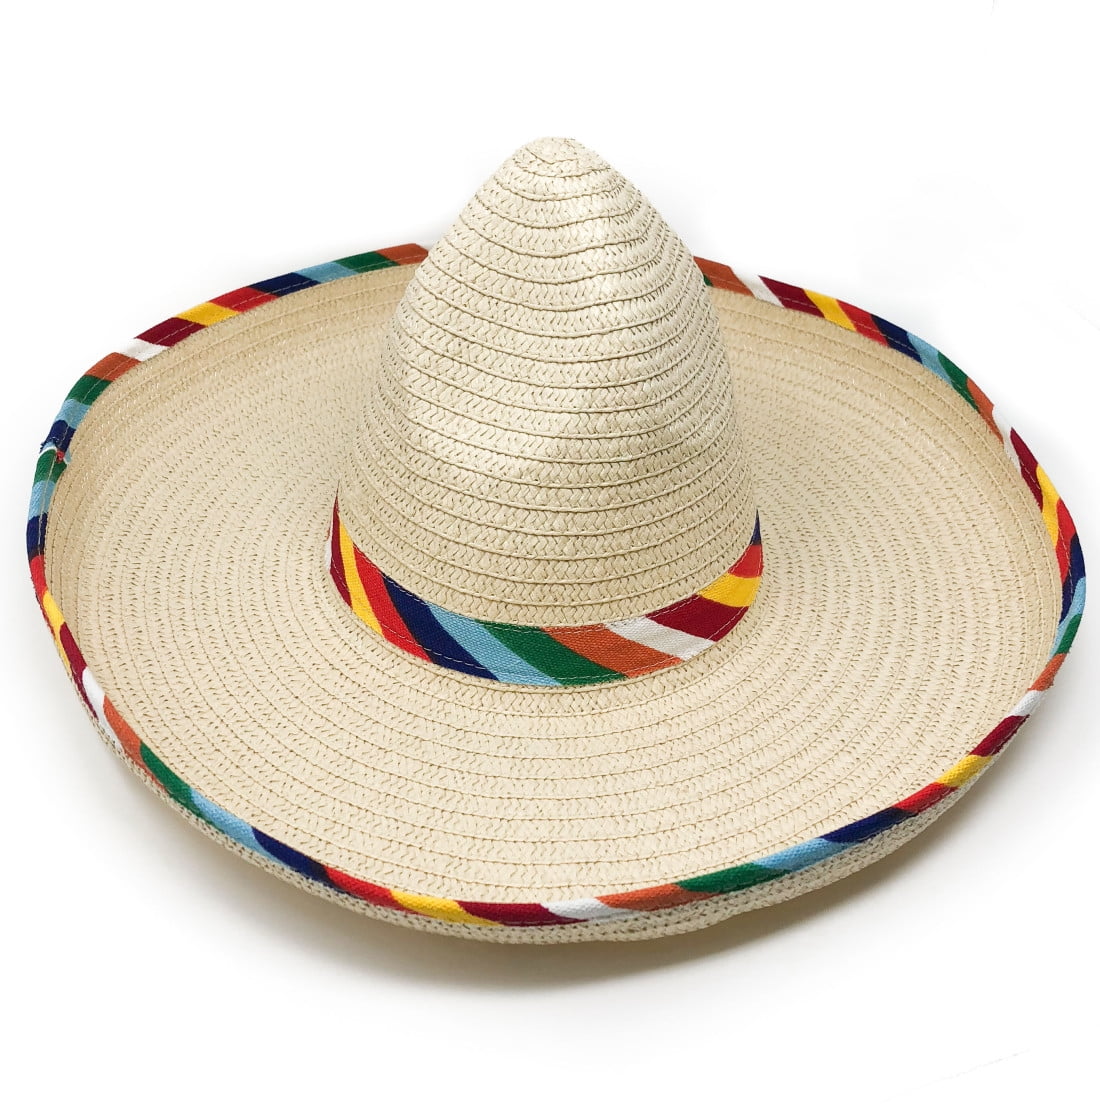 5 DE MAYO PARTY NEW MEXICAN SARAPE COSTUME ONE PIECE  ADULT MEXICO HAT 